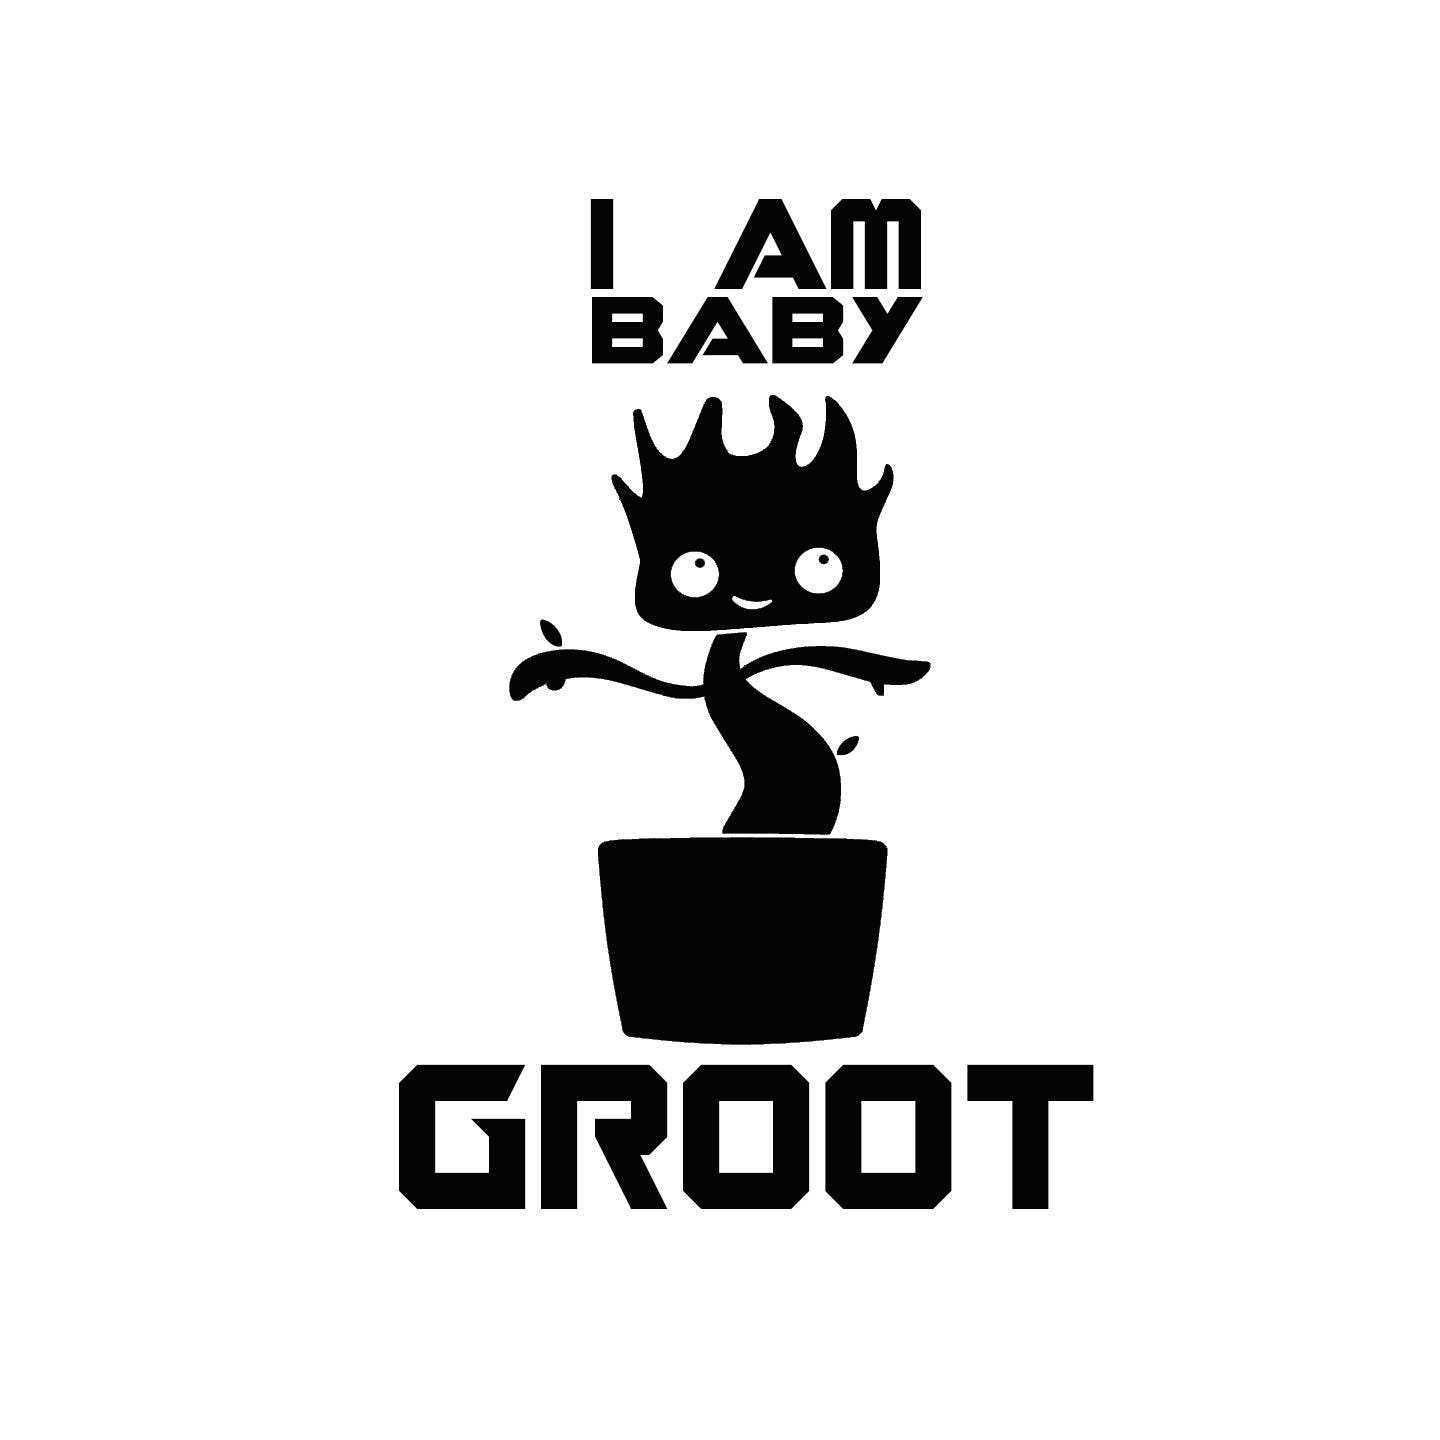 Download Guardians of the Galaxy 2 SVG Files Baby Groot Cutting files